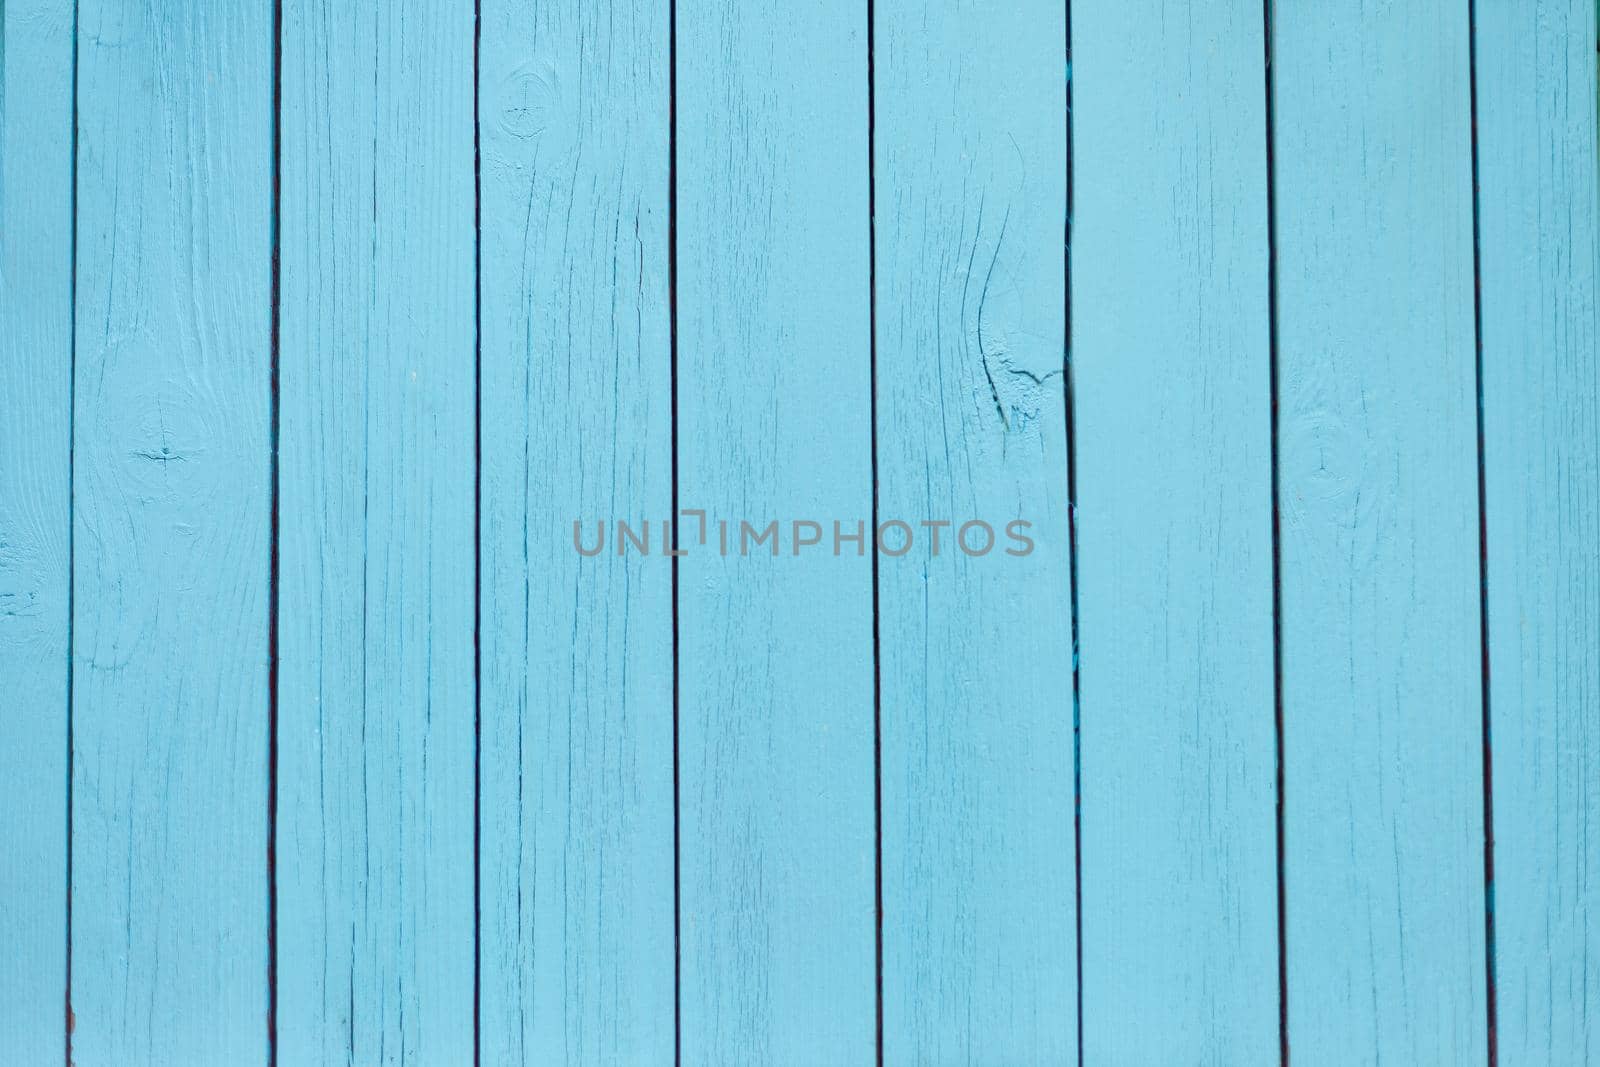 Distressed Vintage Boy Blue Grunge Wood Grain Texture Background. blue textured wooden wall. shabby wood